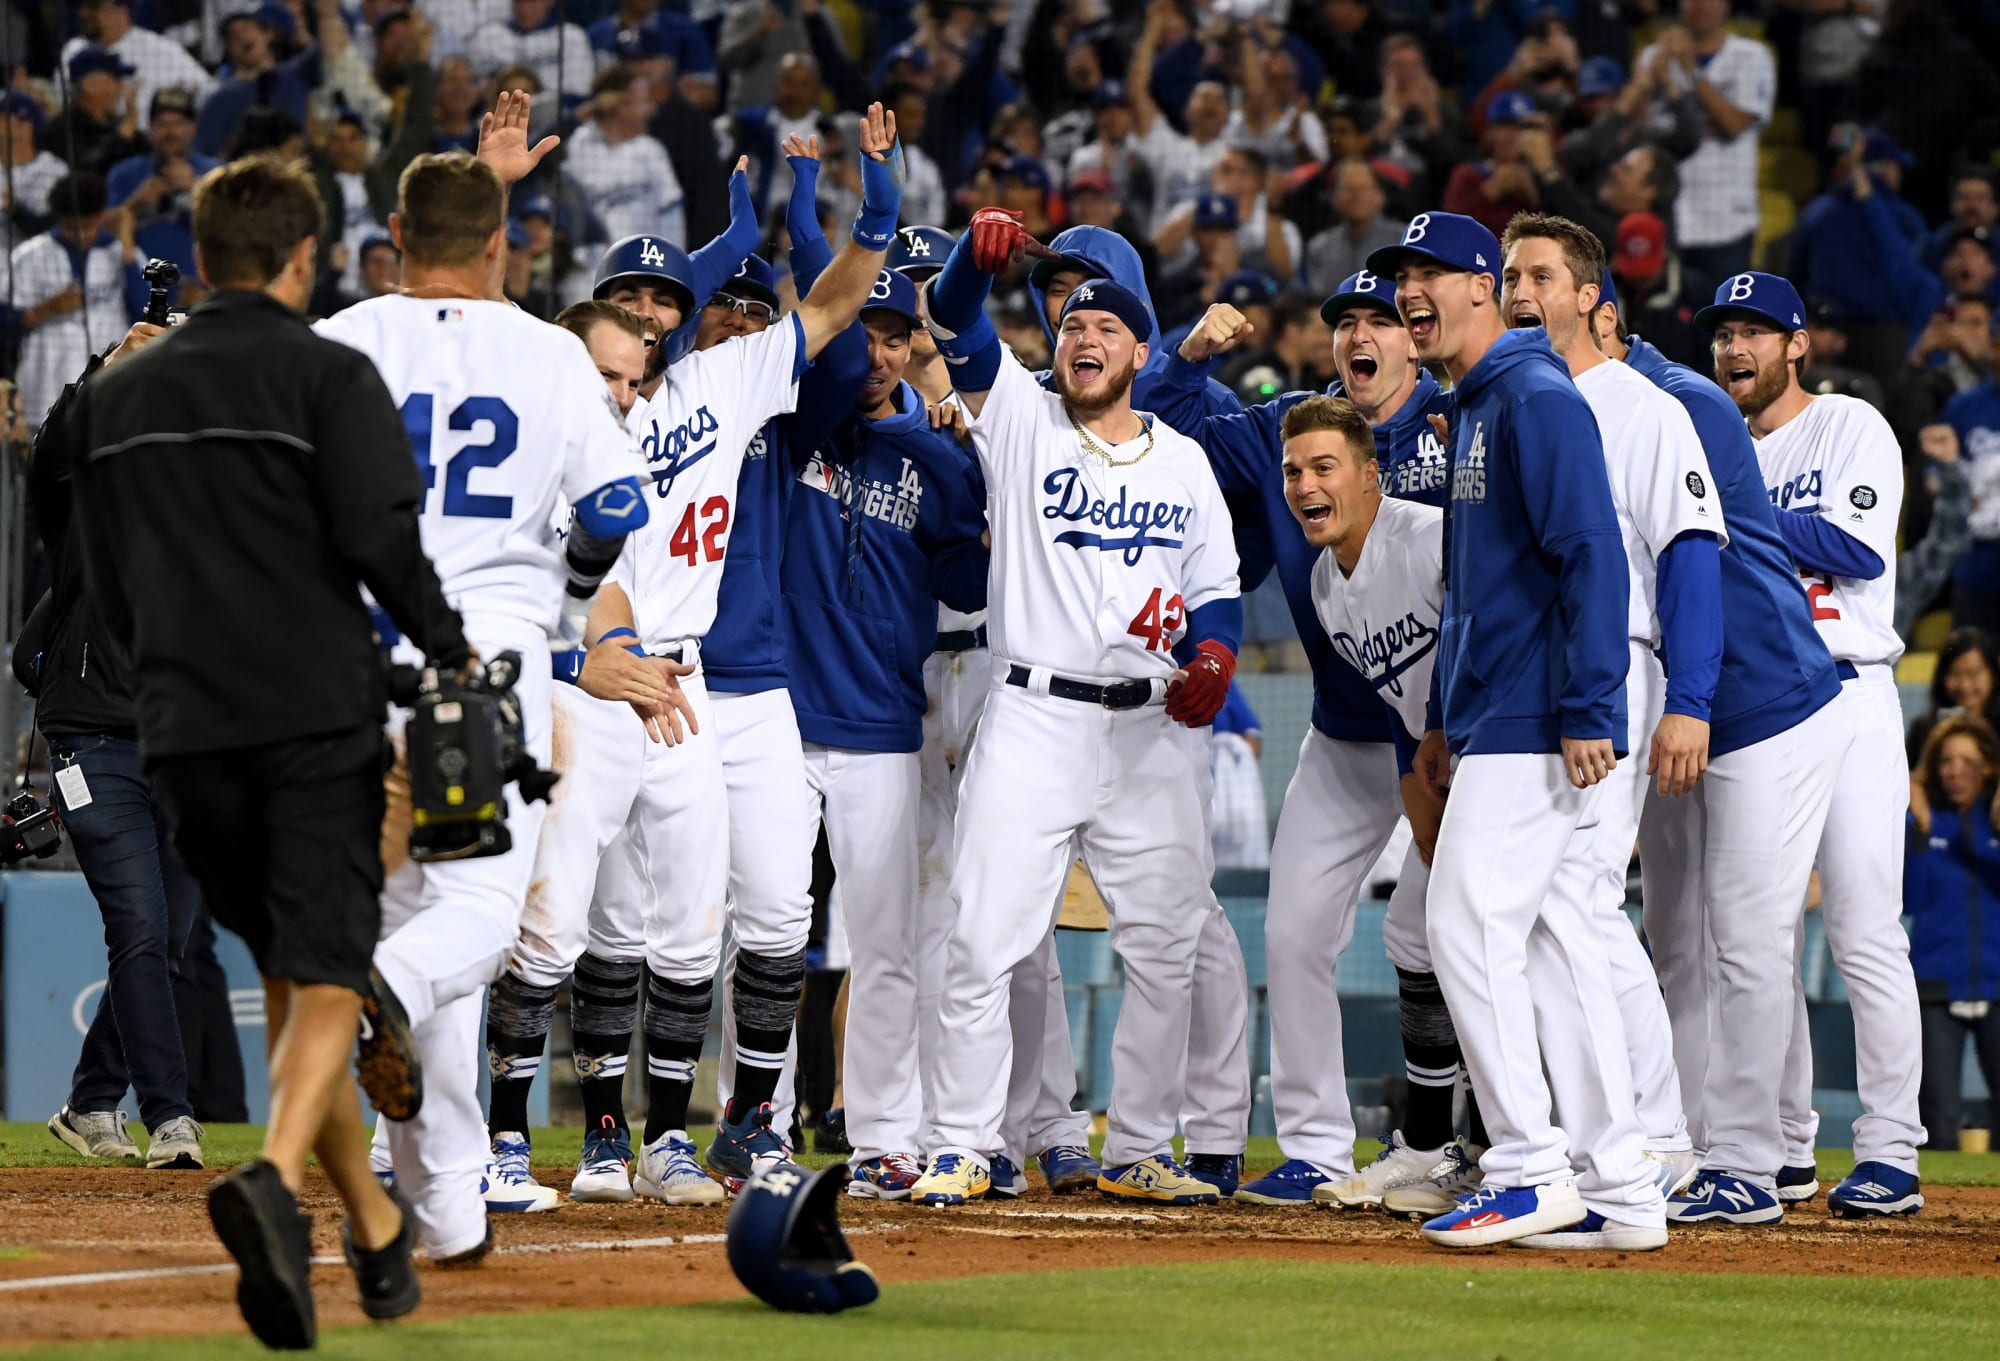 Los Angeles Dodgers: Going for a third win in a row